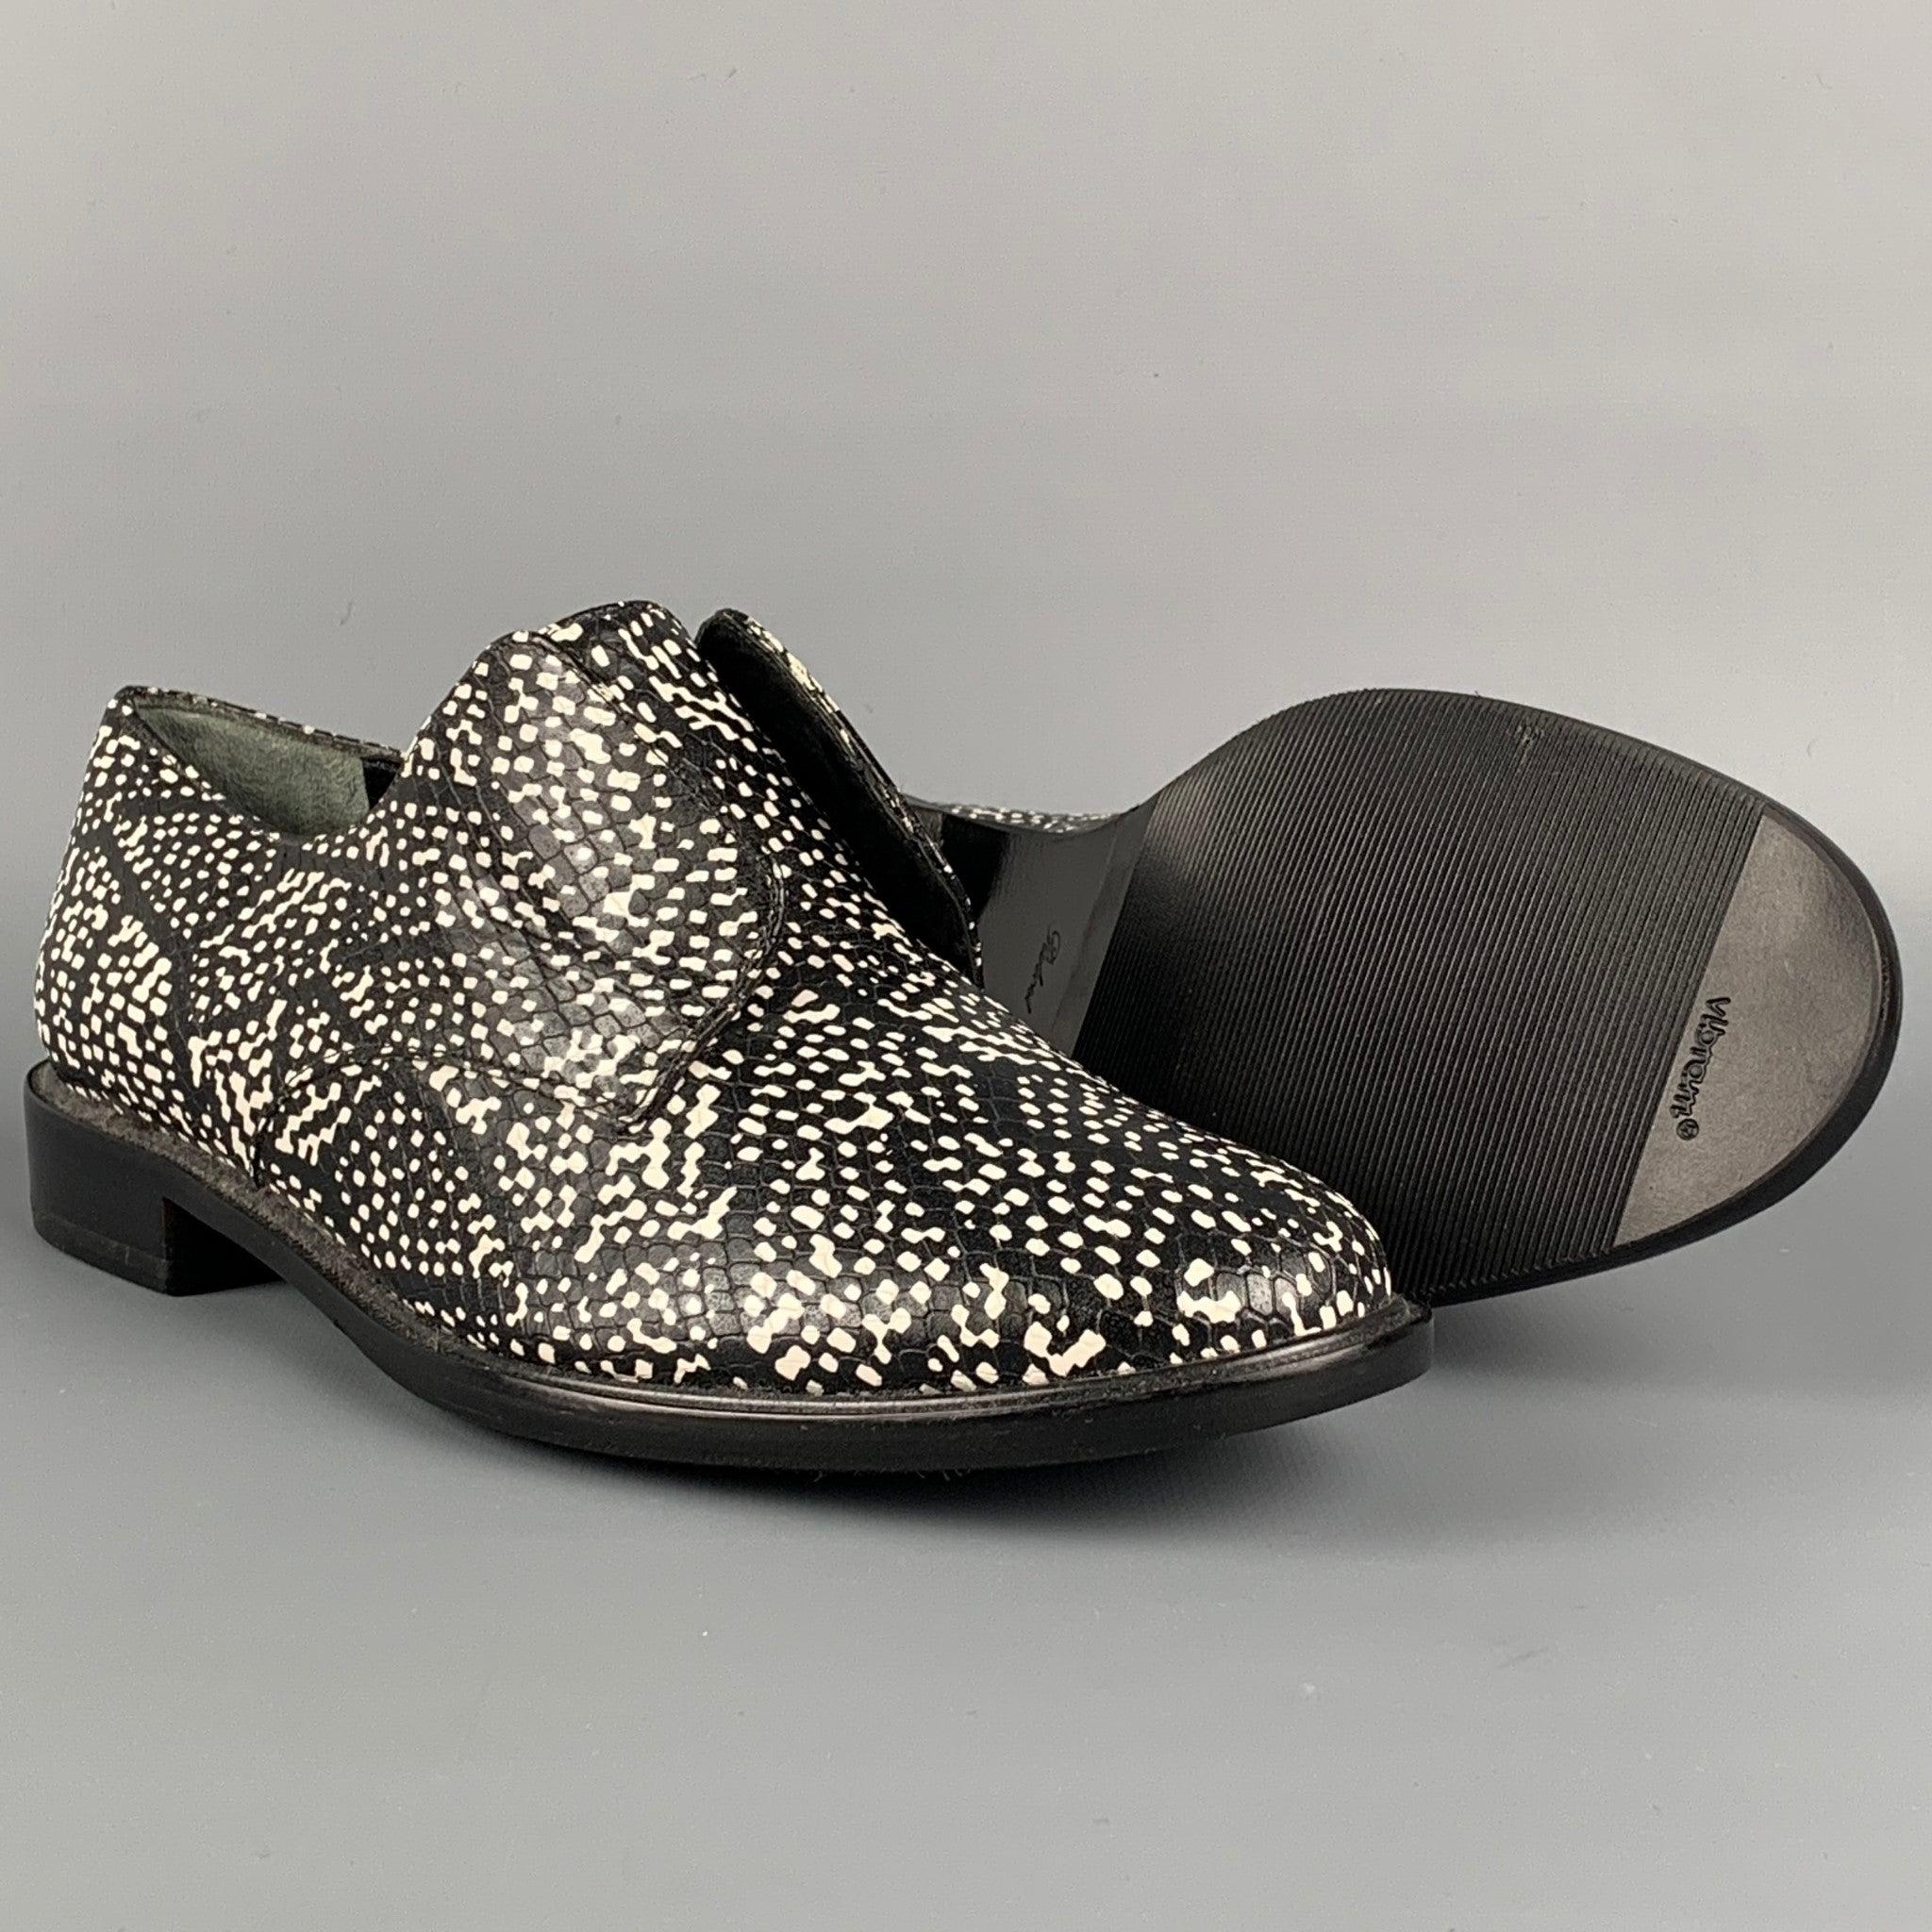 ROBERT CLERGERIE Size 7.5 Black White Leather Print Laceless Shoes In Good Condition For Sale In San Francisco, CA